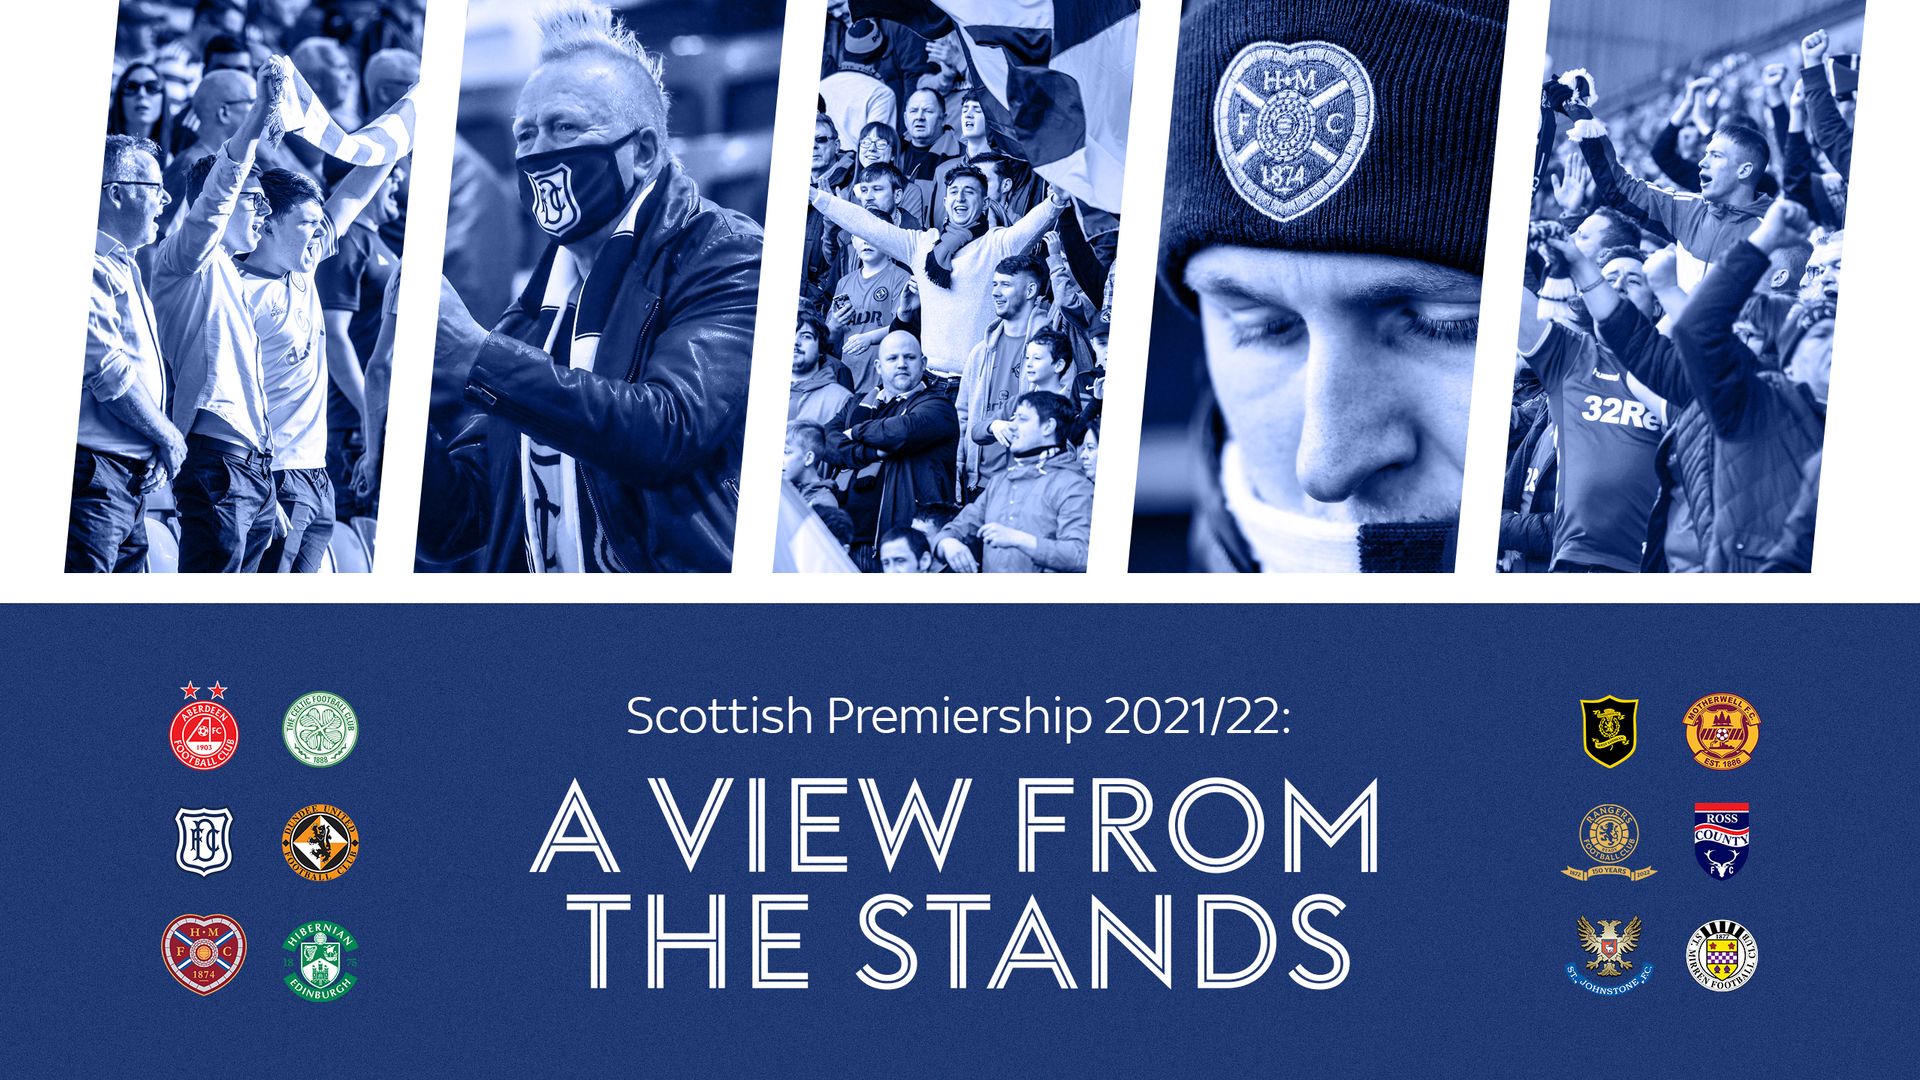 Scottish Premiership 2021/22: View from the stands